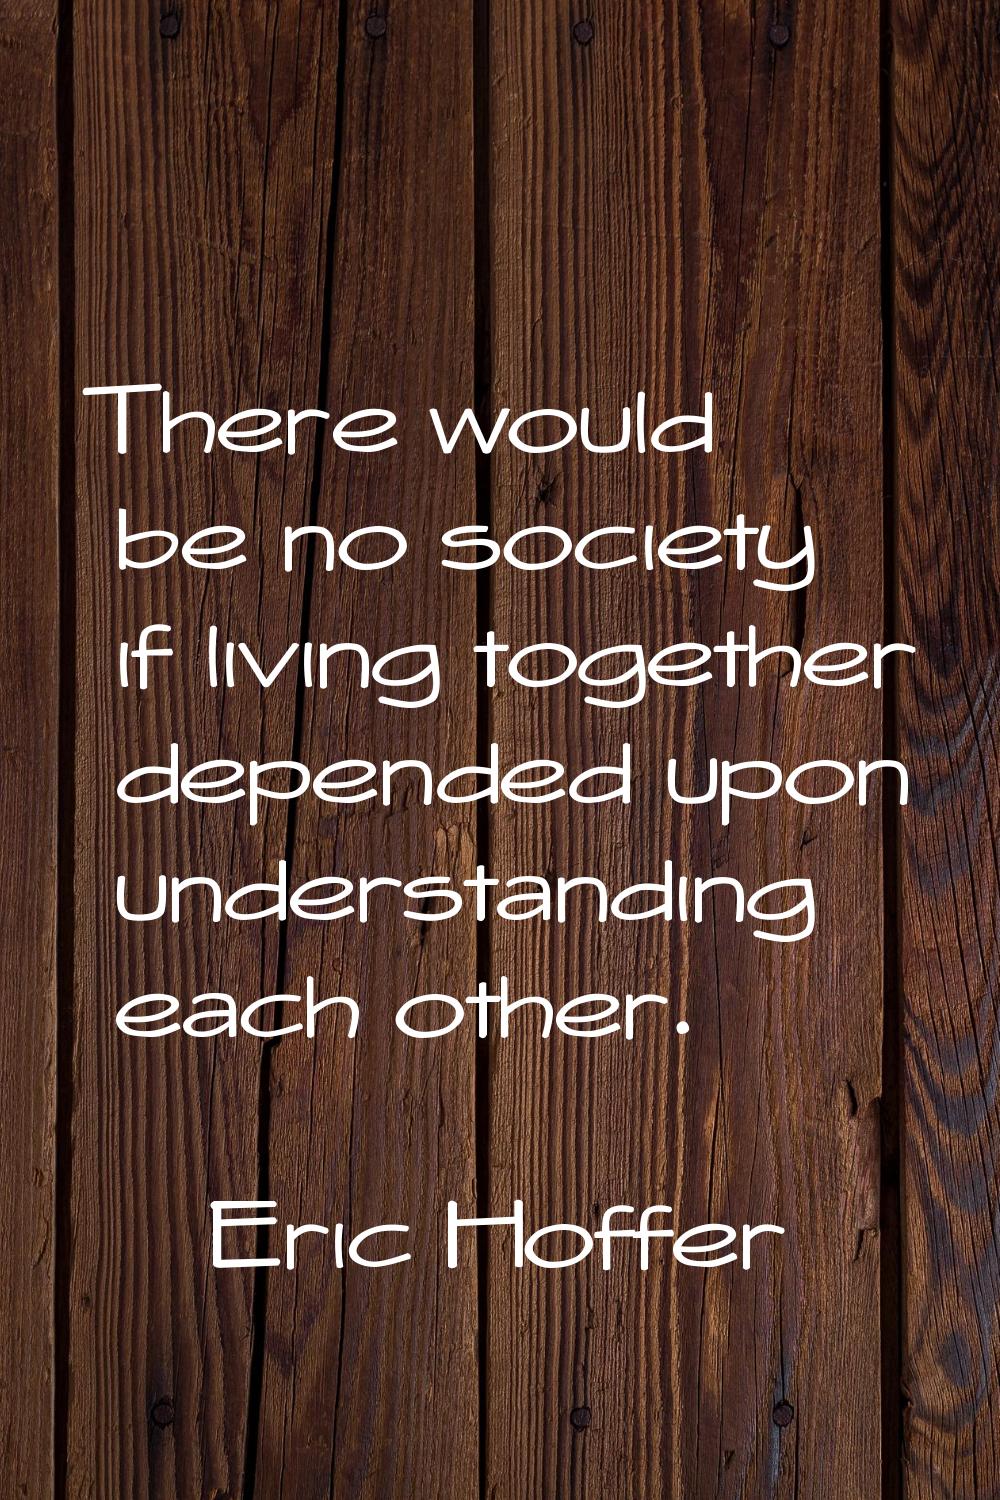 There would be no society if living together depended upon understanding each other.